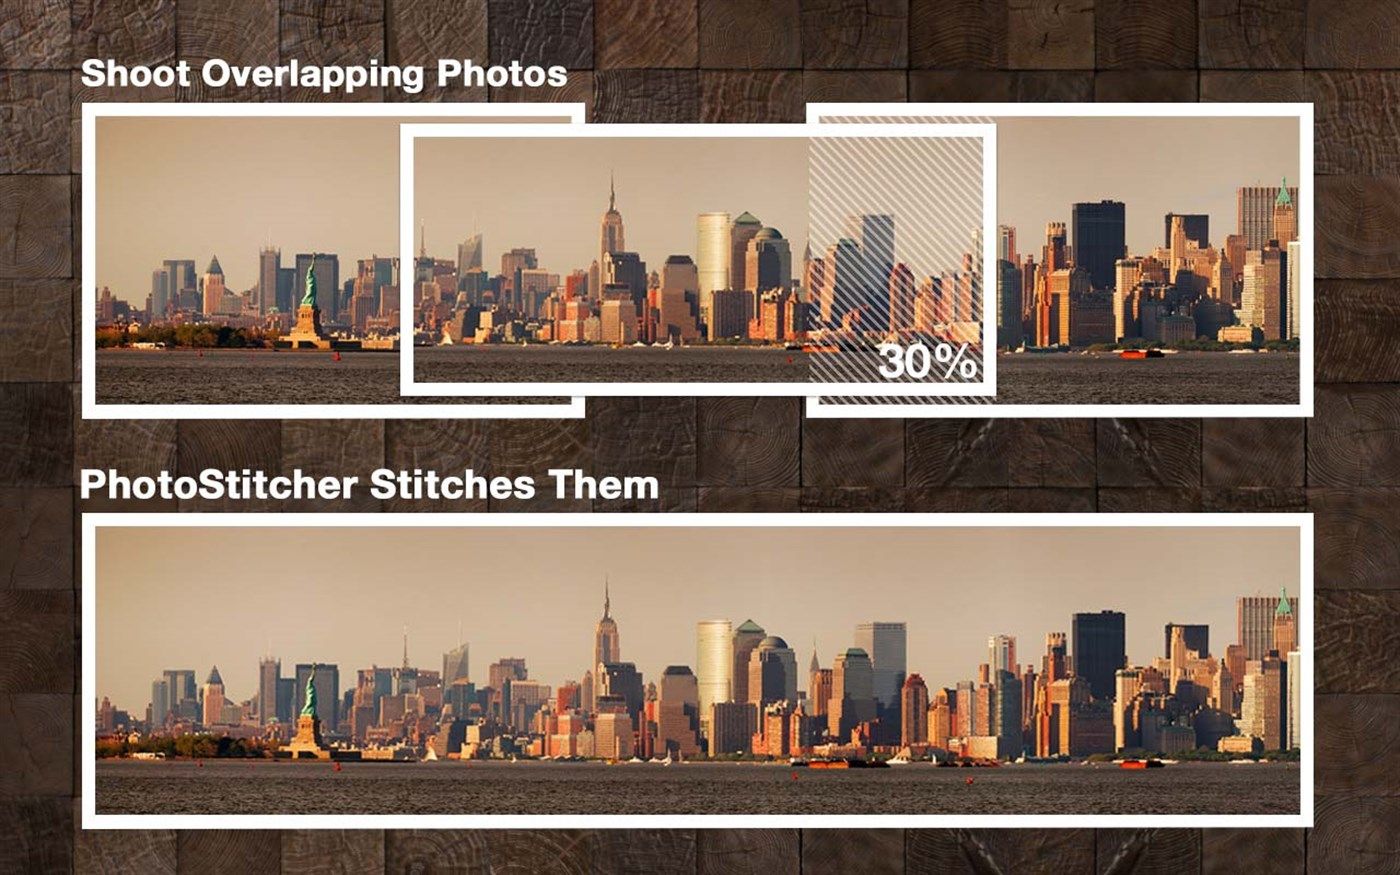 Shoot Overlapping Photos and PhotoStitcher Stitches Them All